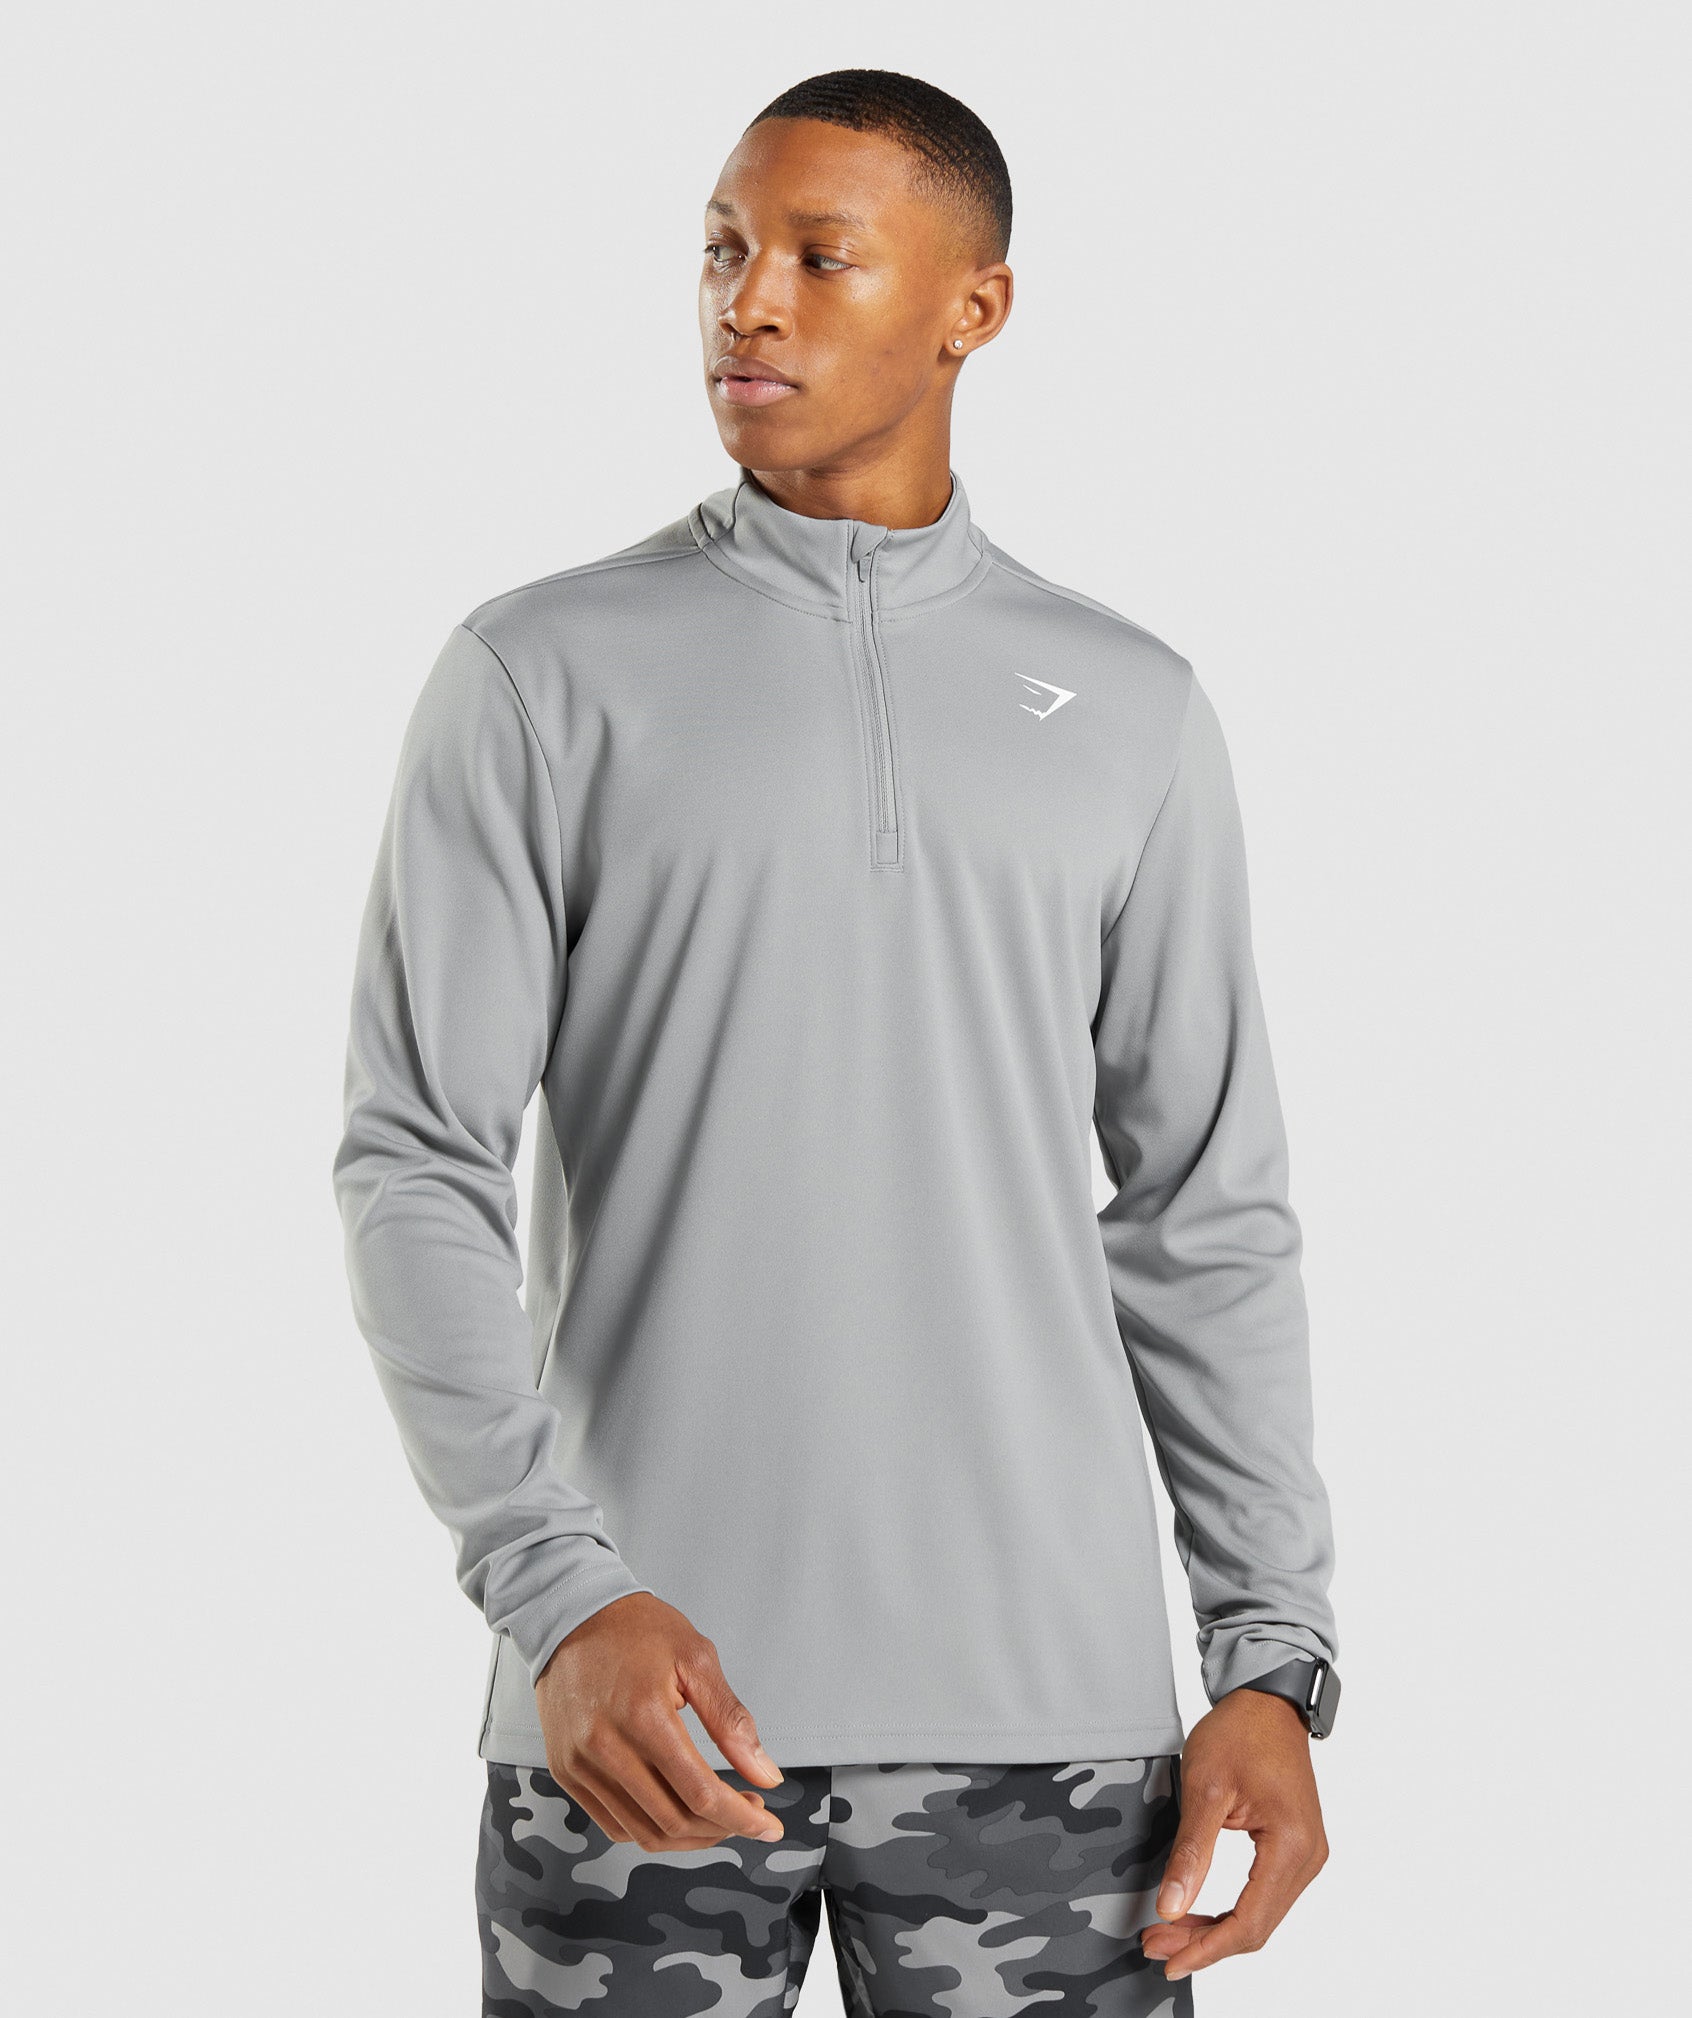 Arrival 1/4 Zip Pullover in Smokey Grey - view 1